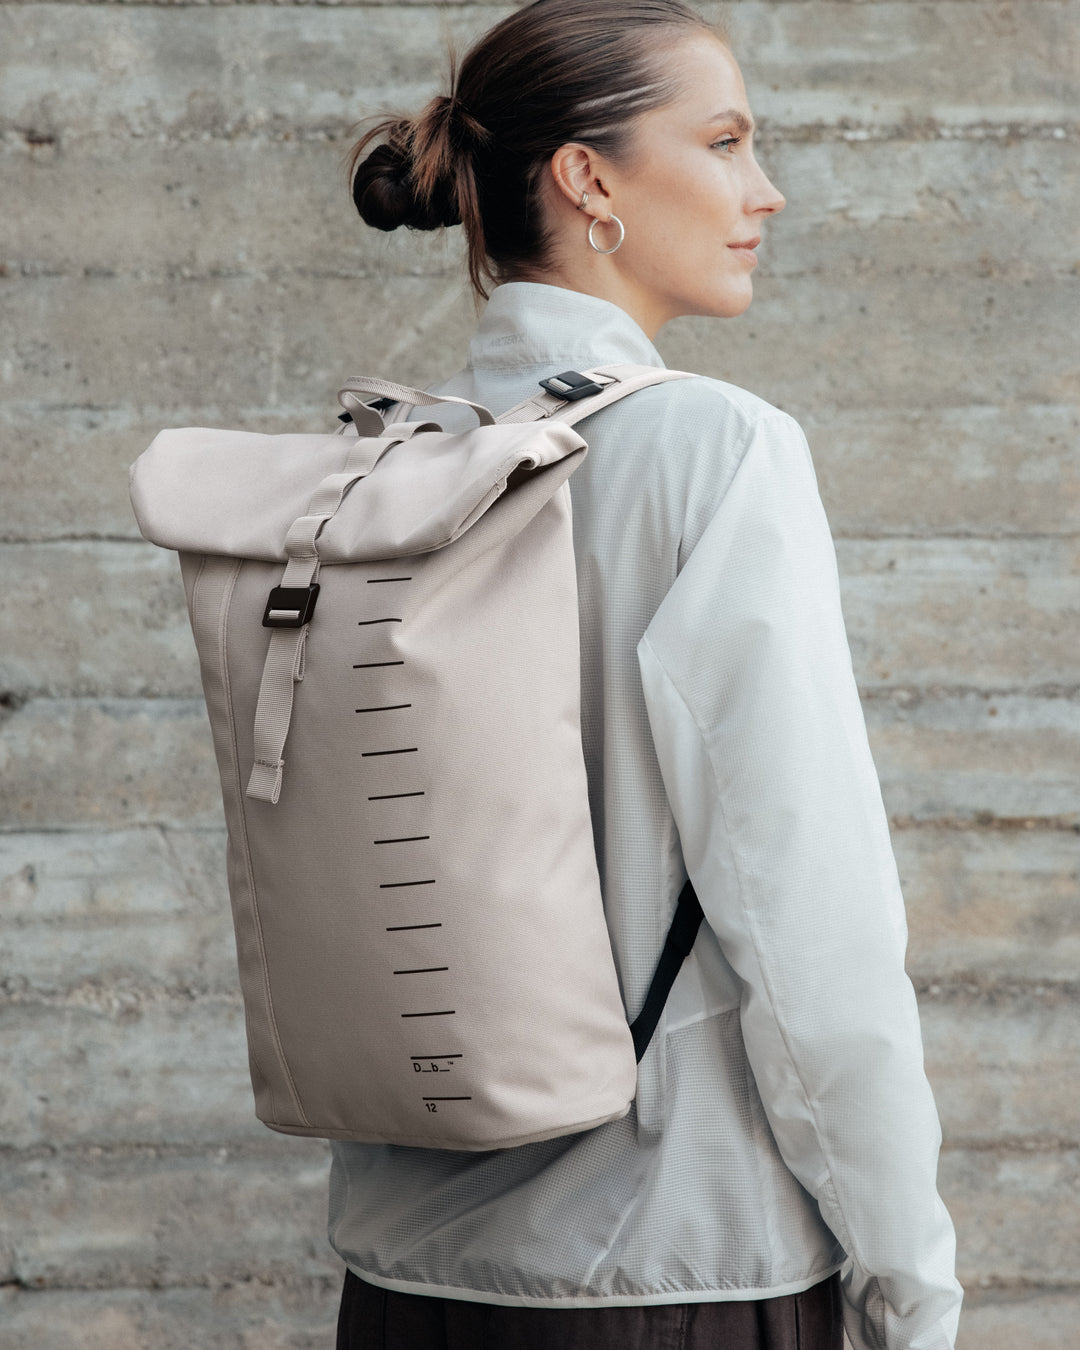 Essential Backpack 12L_fogbow beige_on person.jpg